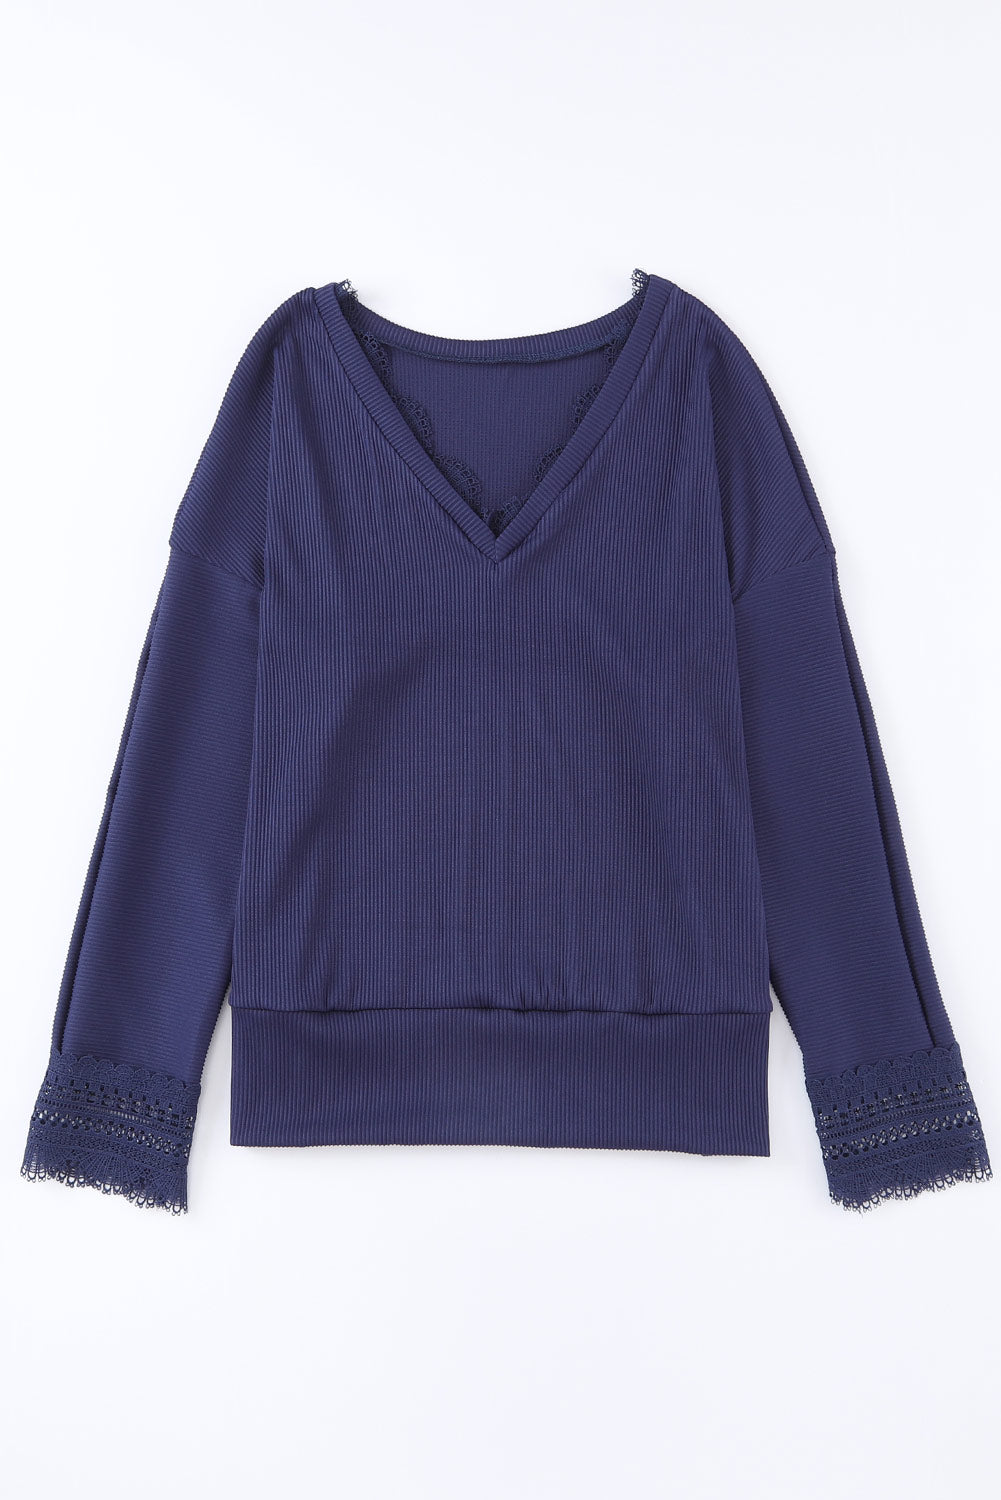 Blue Ribbed Texture Lace Trim V Neck Long Sleeve Top-4